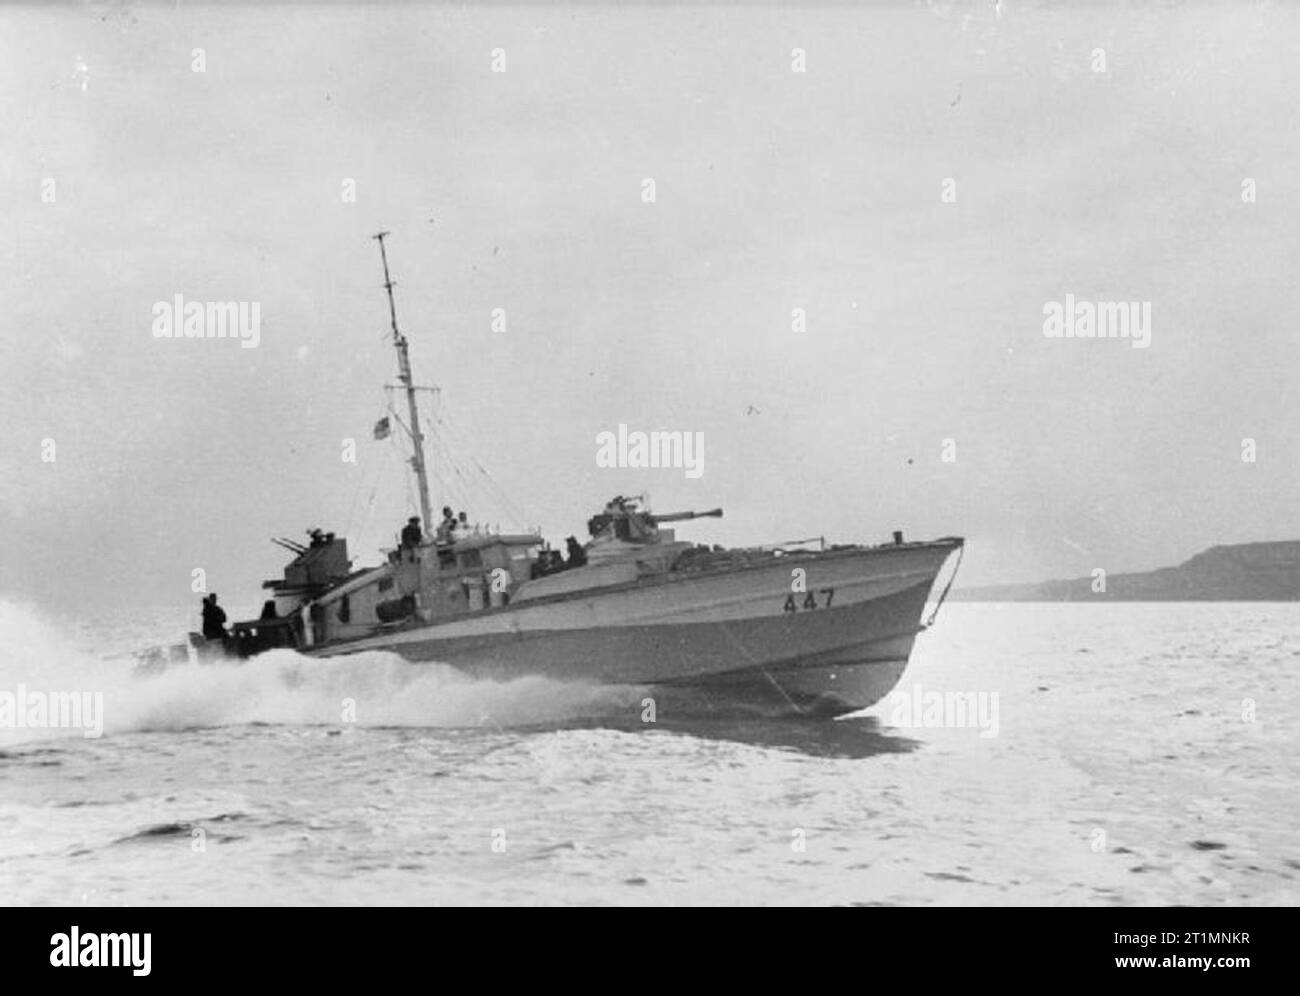 The Royal Navy during the Second World War 71.5ft British Power Boat MTB 447 based at the coastal forces base HMS BEEHIVE. The boat was not fitted with tubes and was really a Motor Gun Boat. Powered by three Packard engines, it had a complement of two officers and 14 ratings. The armament included a 2pdr pom-pom and three 20mm Oerlikons. Stock Photo